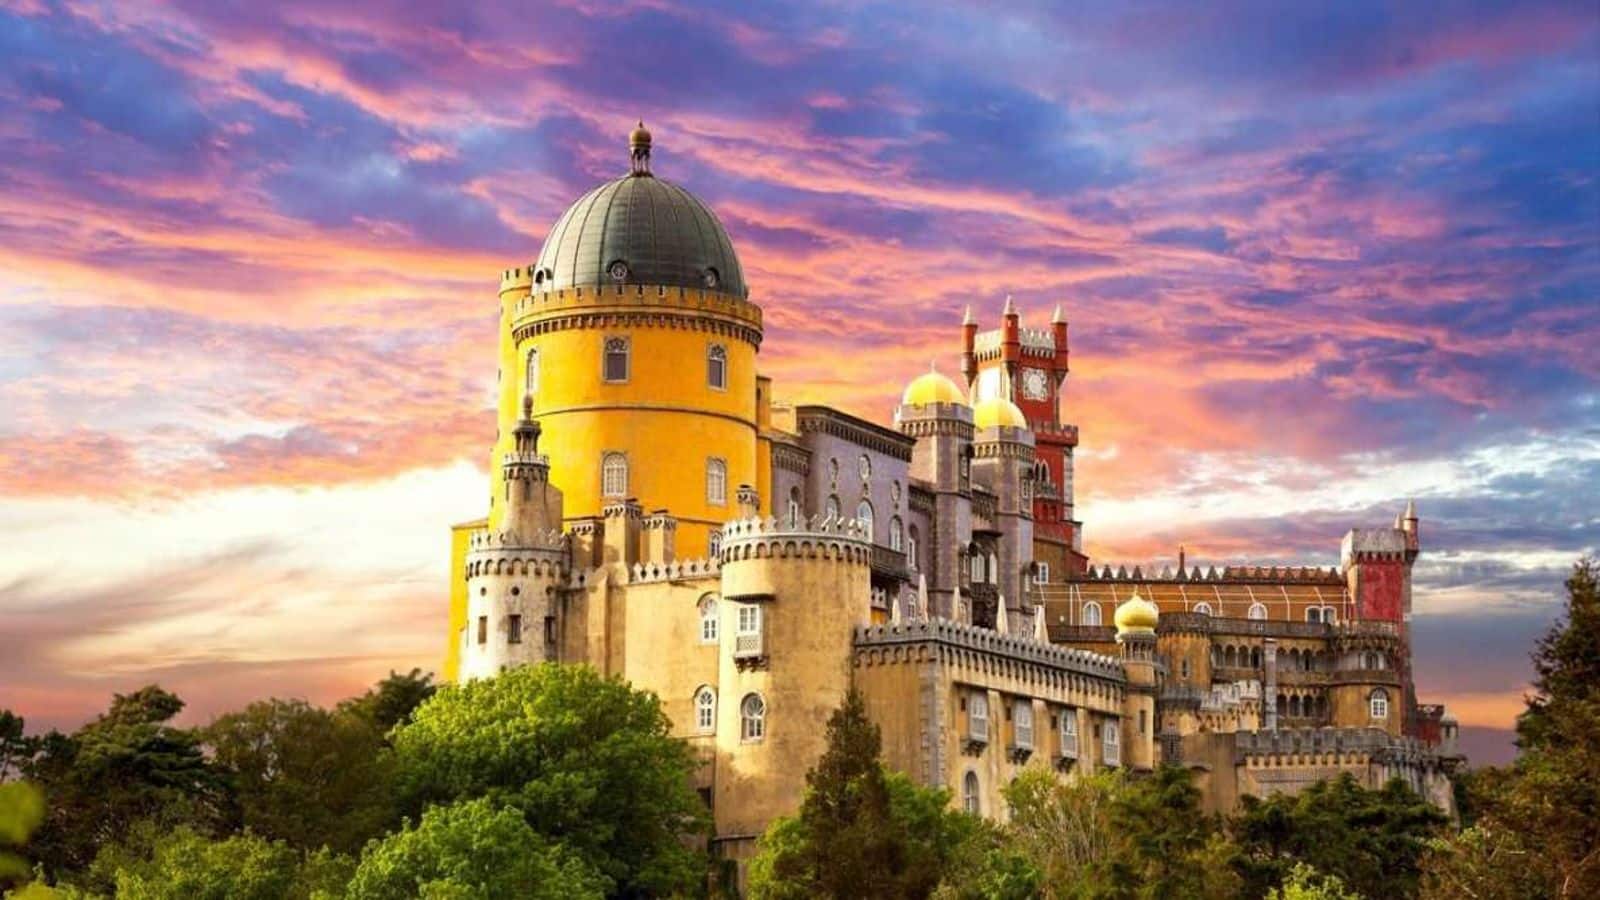 Discover Sintra's magical charm with this things-to-do guide